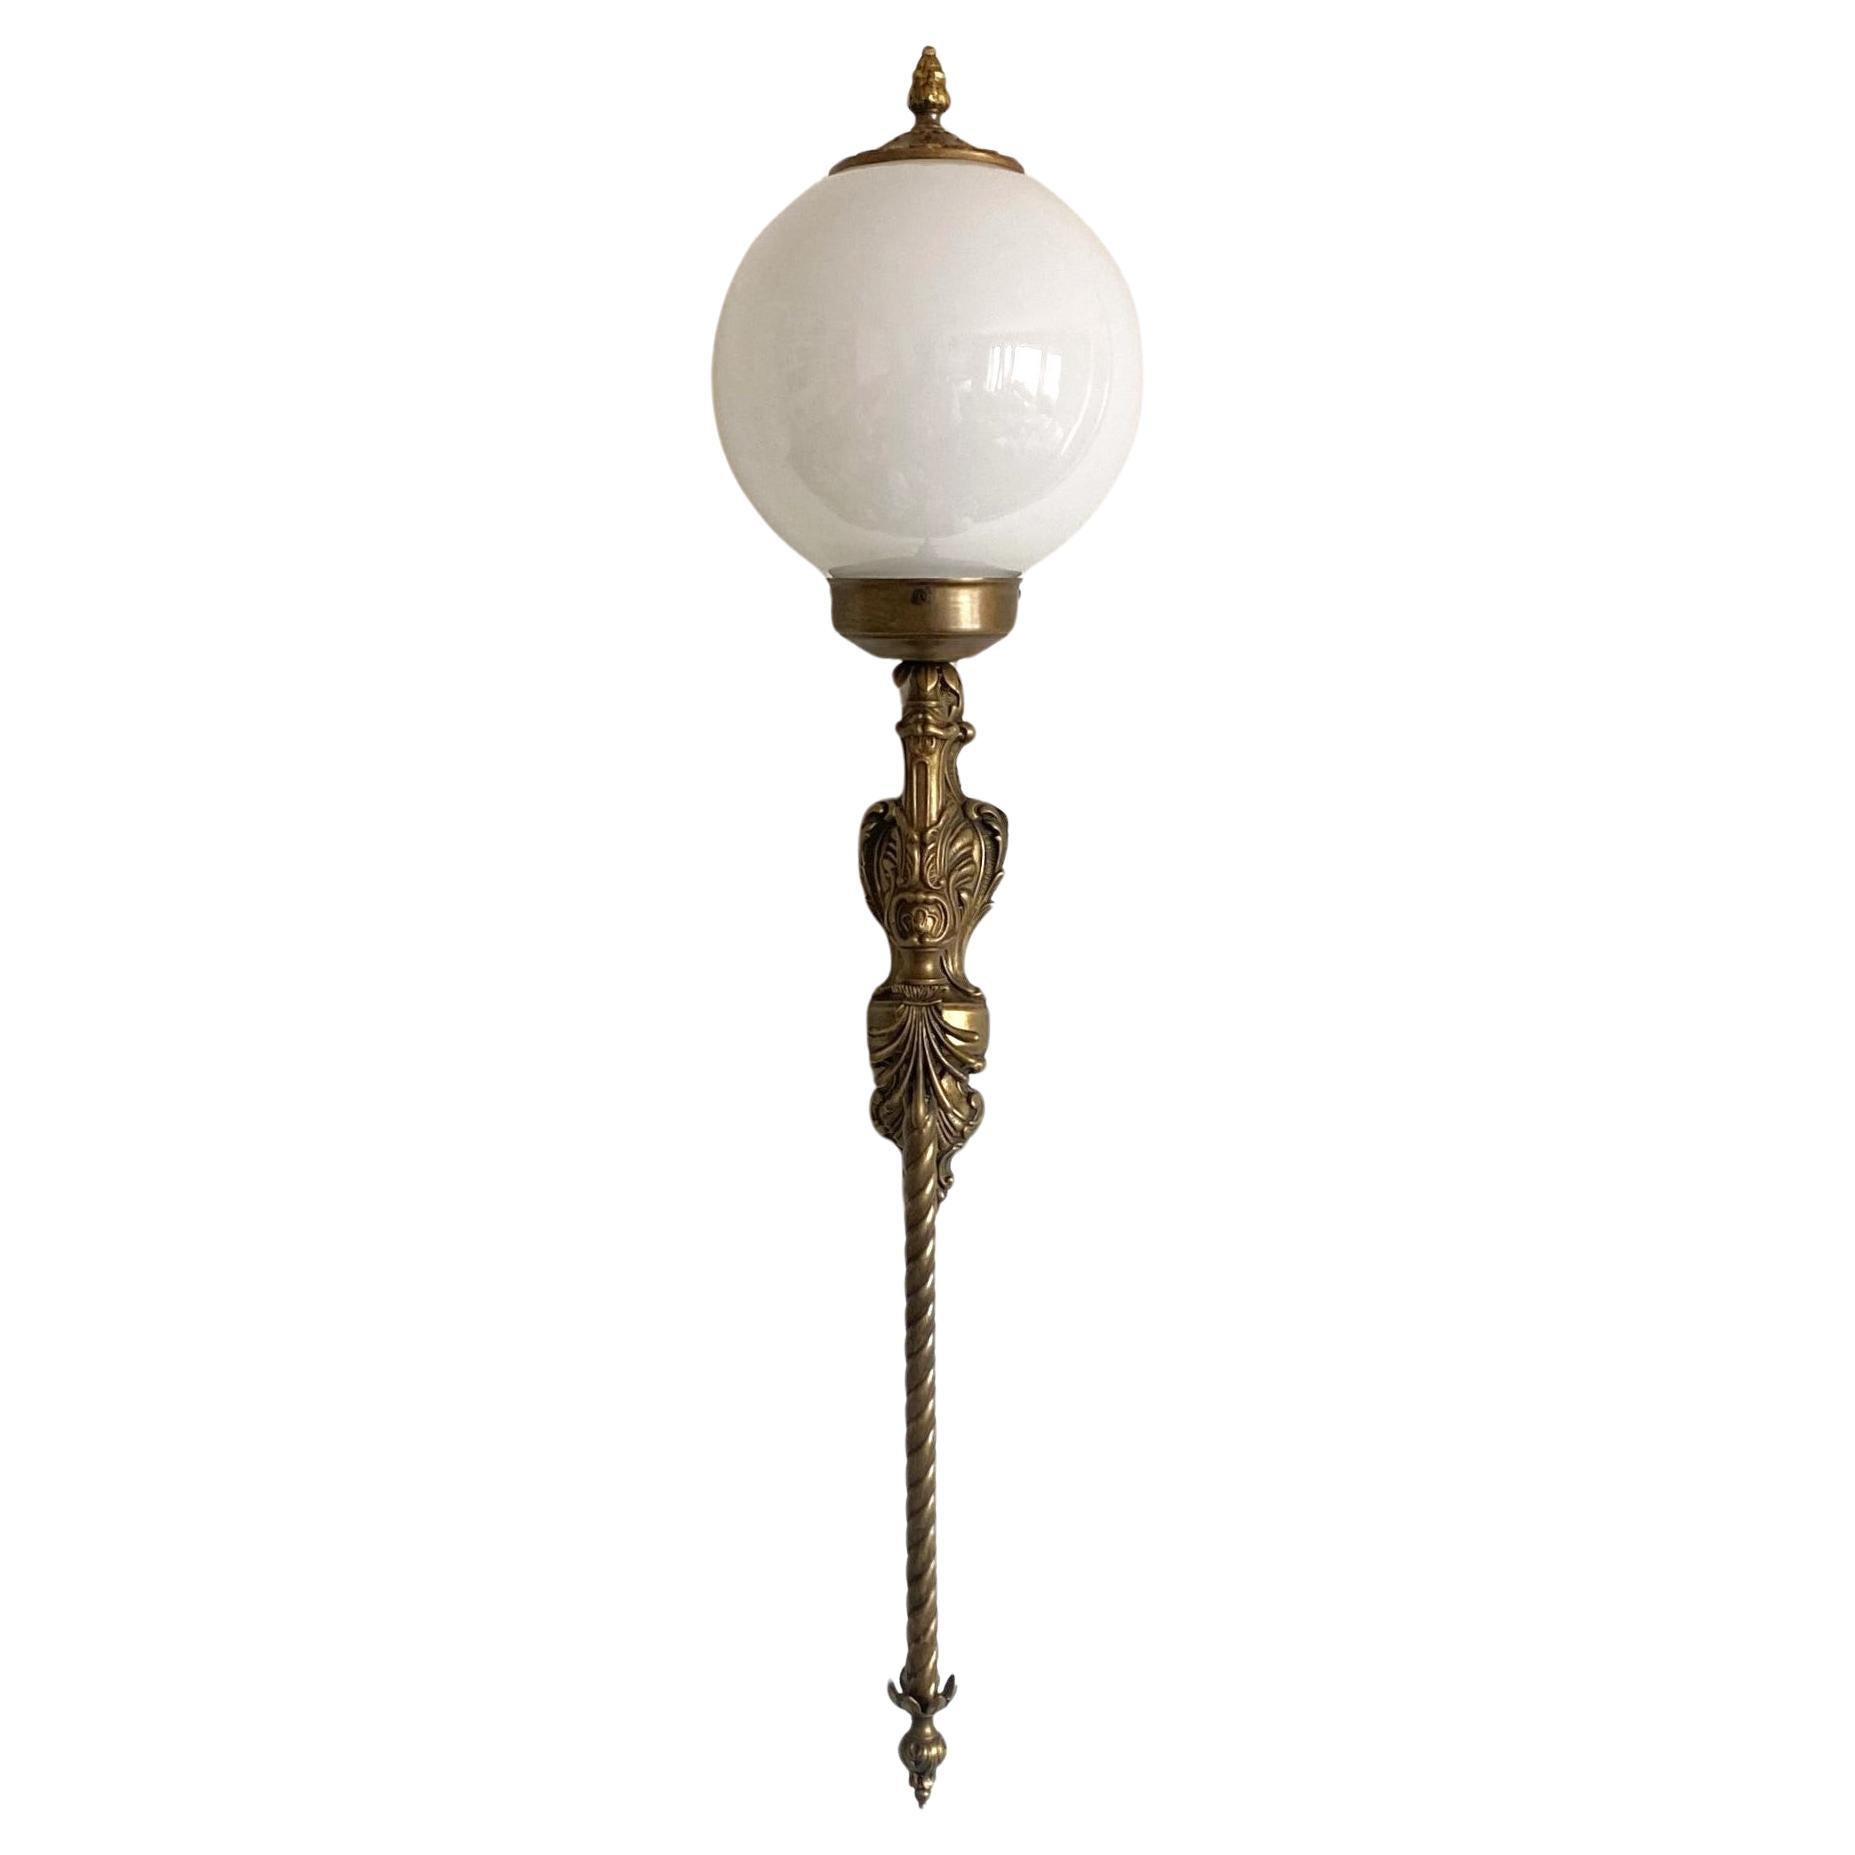 Superb, tall bronze wall torchiere sconce or wall lantern for indoor and outdoor use, France, 1920-1929. Old Bronze richly decorated with fine details, hand-blown opaline glass ball globe. It takes one E27 screw light bulb. LED bulbs can also be